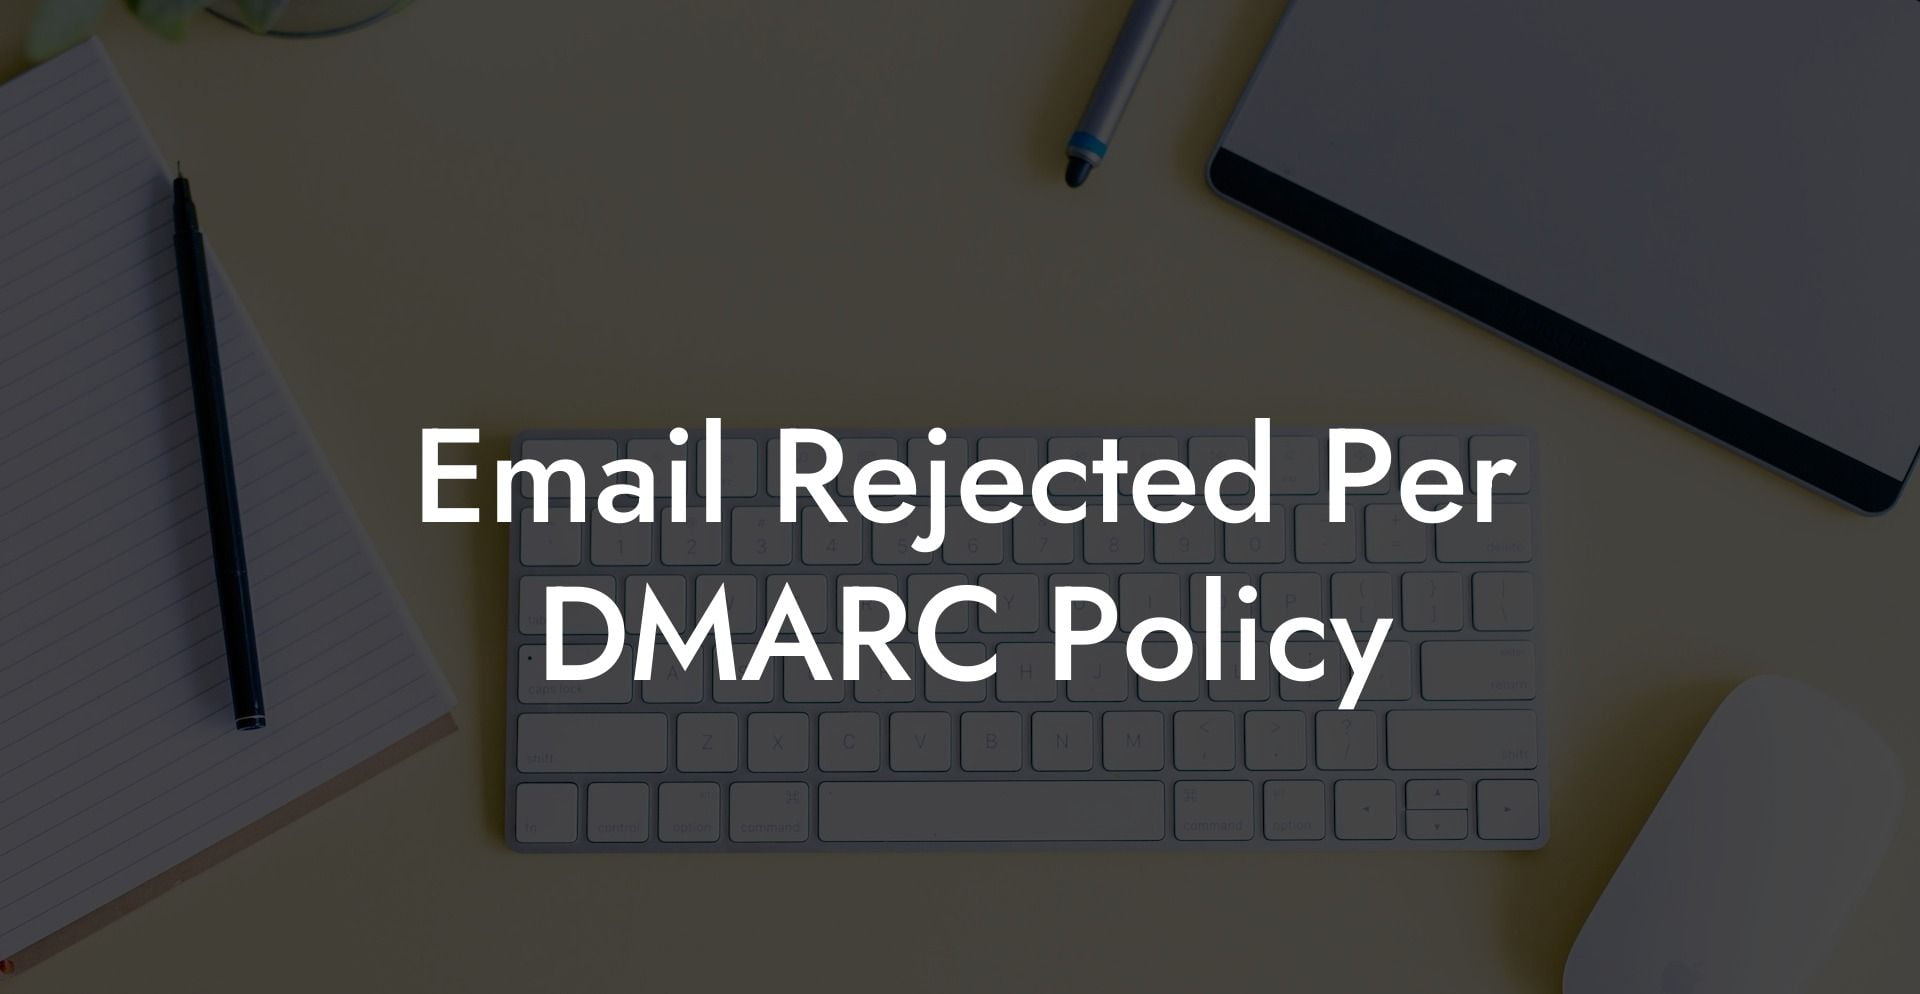 Email Rejected Per DMARC Policy